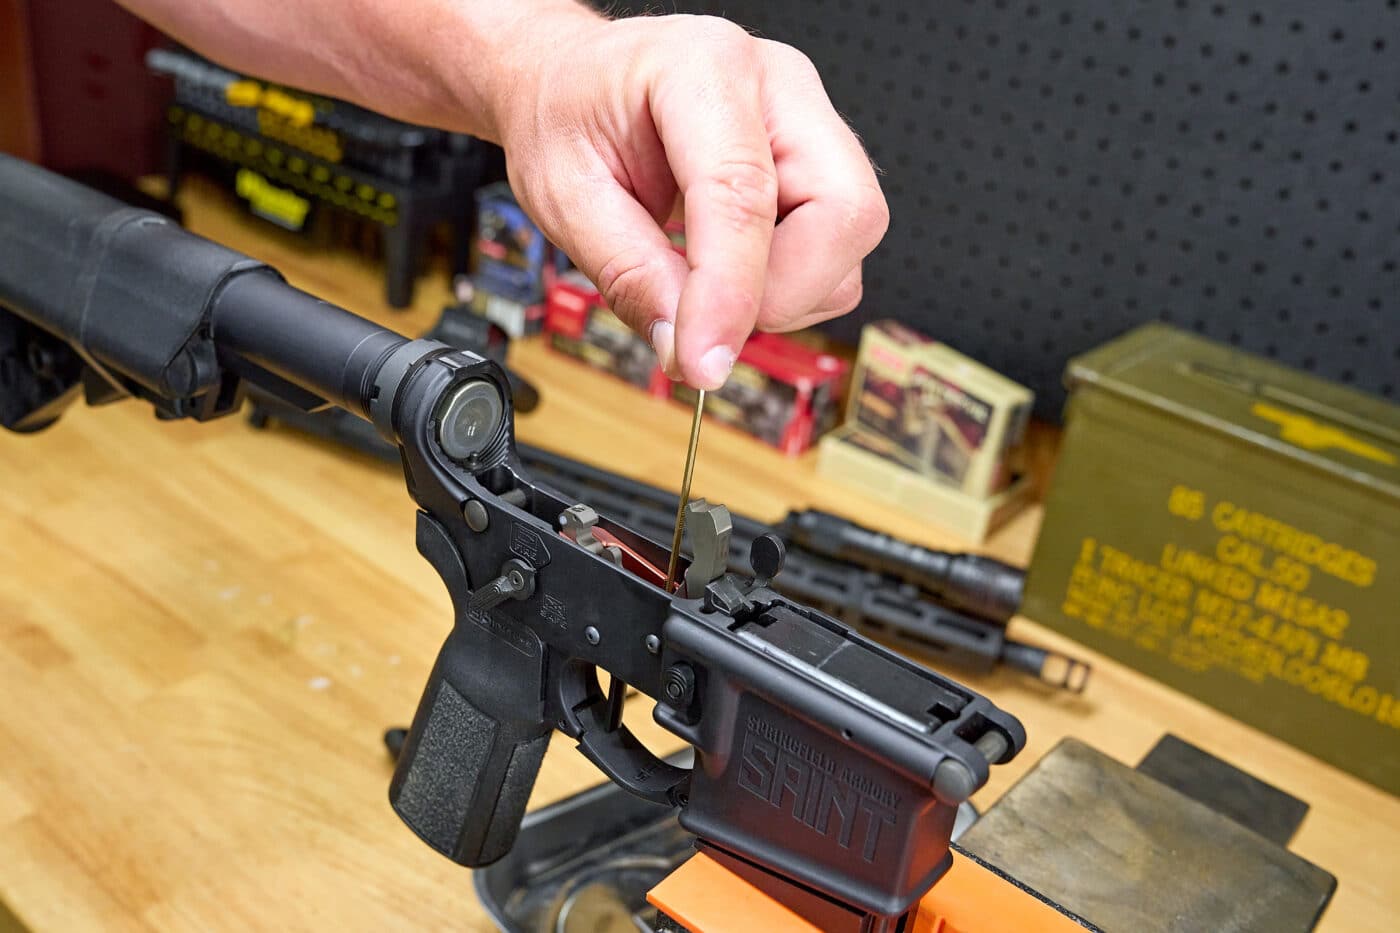 installing the Timney 2-stage trigger in a Springfield SAINT AR-15